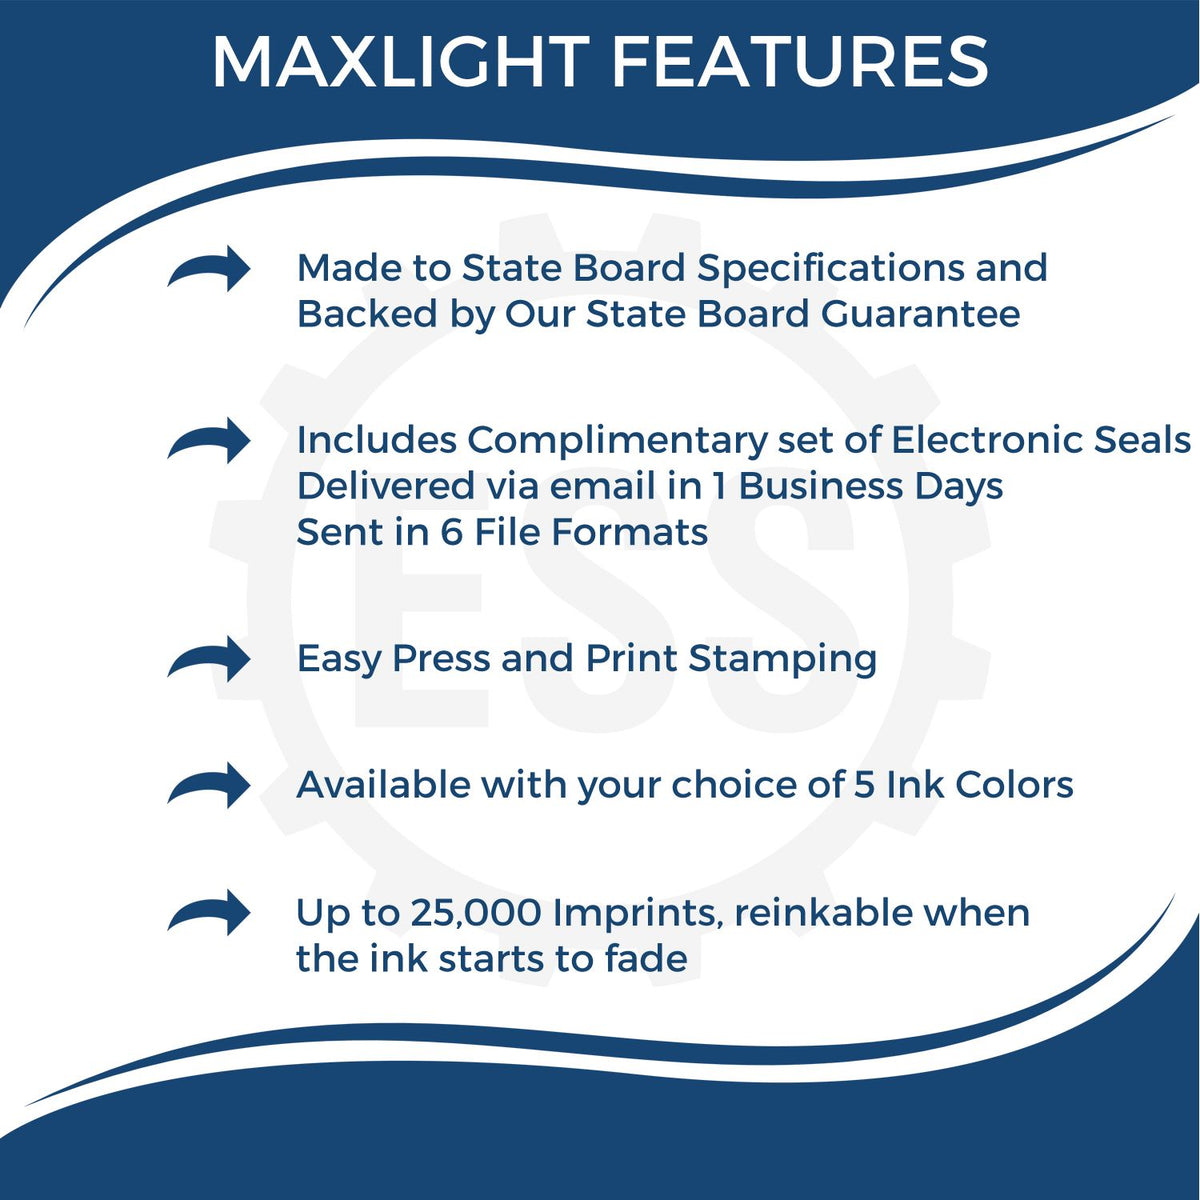 A picture of an infographic highlighting the selling points for the Premium MaxLight Pre-Inked Wyoming Engineering Stamp